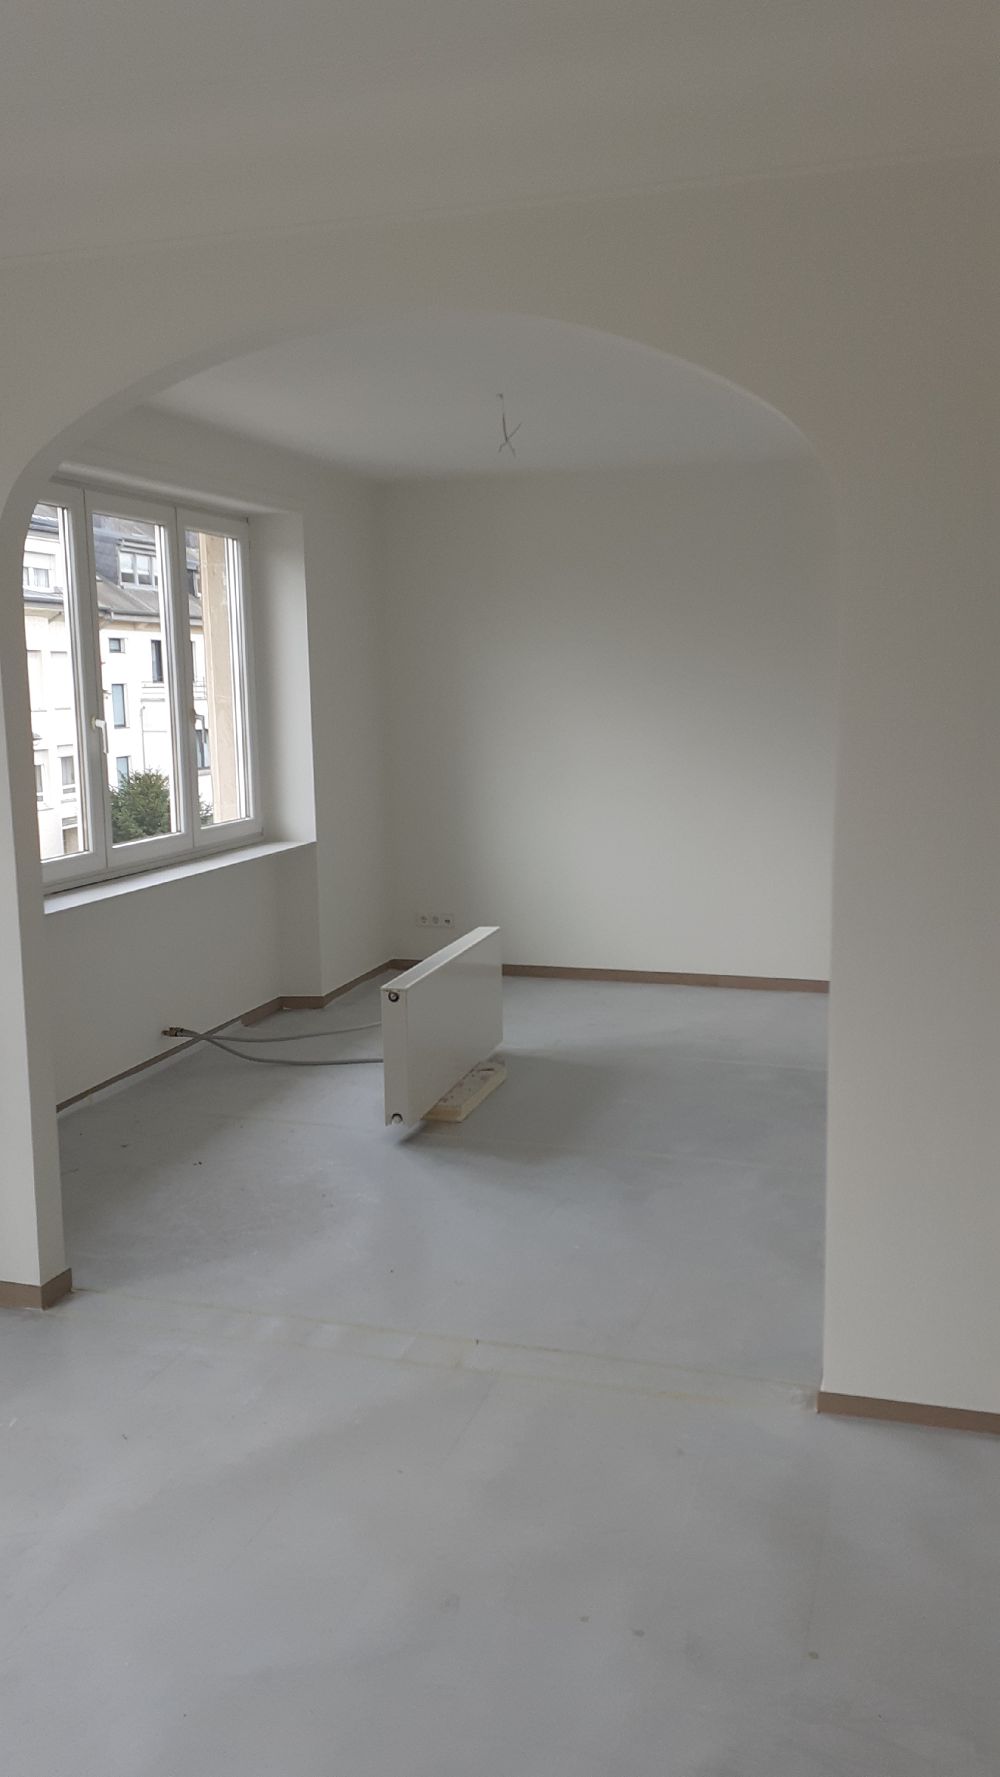 Luxembourg-Belair (Belair) - To rent : apartment